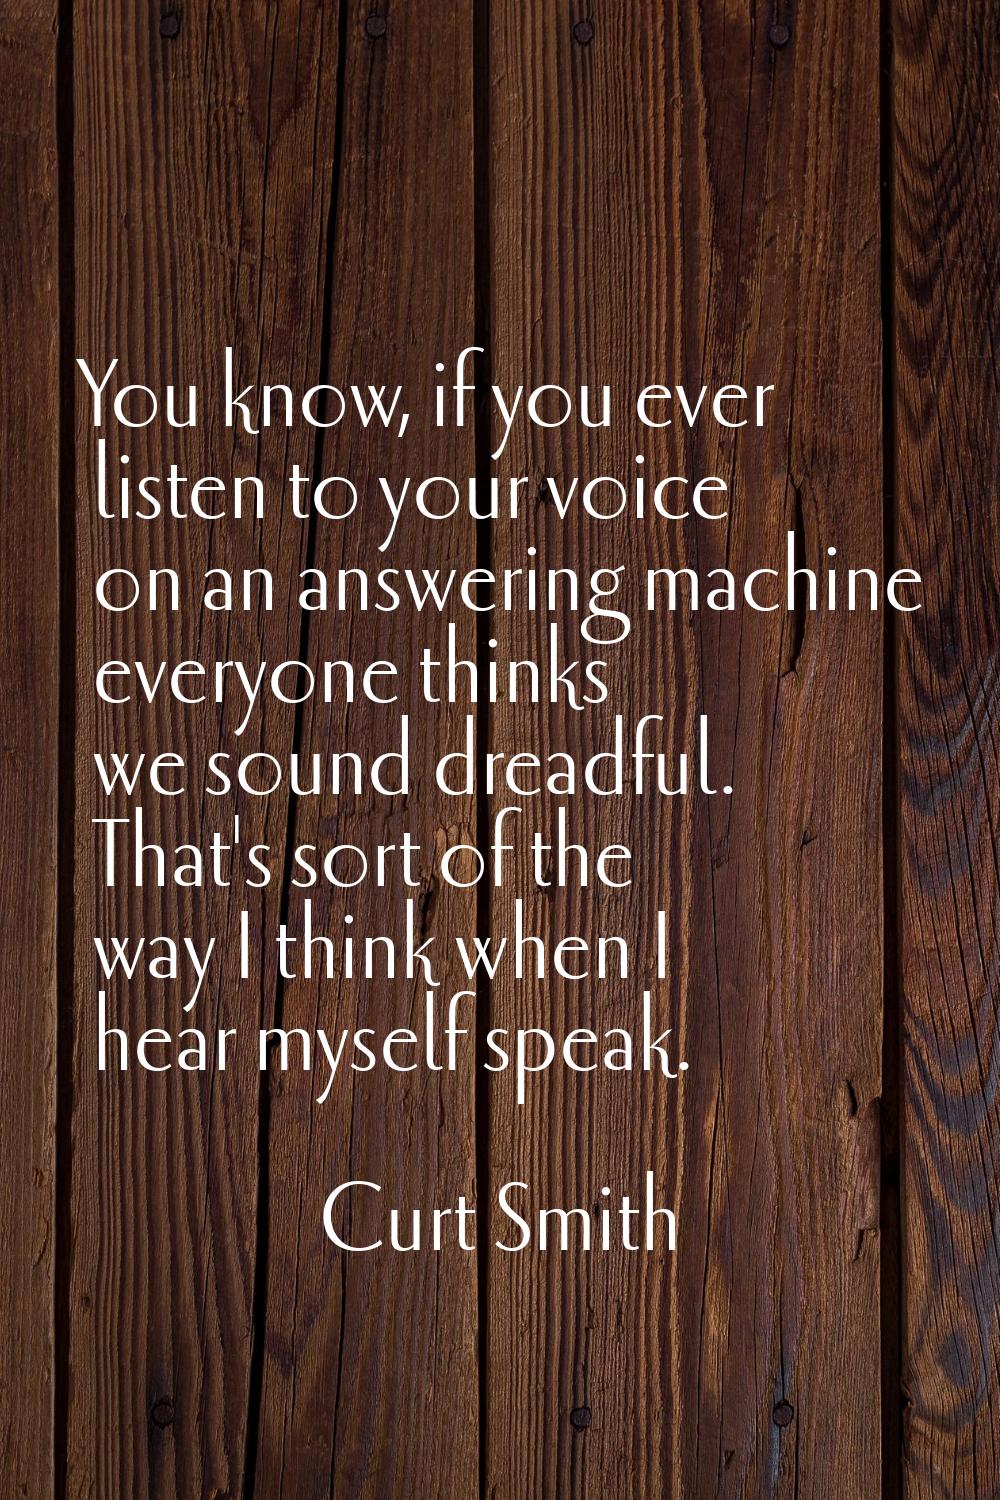 You know, if you ever listen to your voice on an answering machine everyone thinks we sound dreadfu